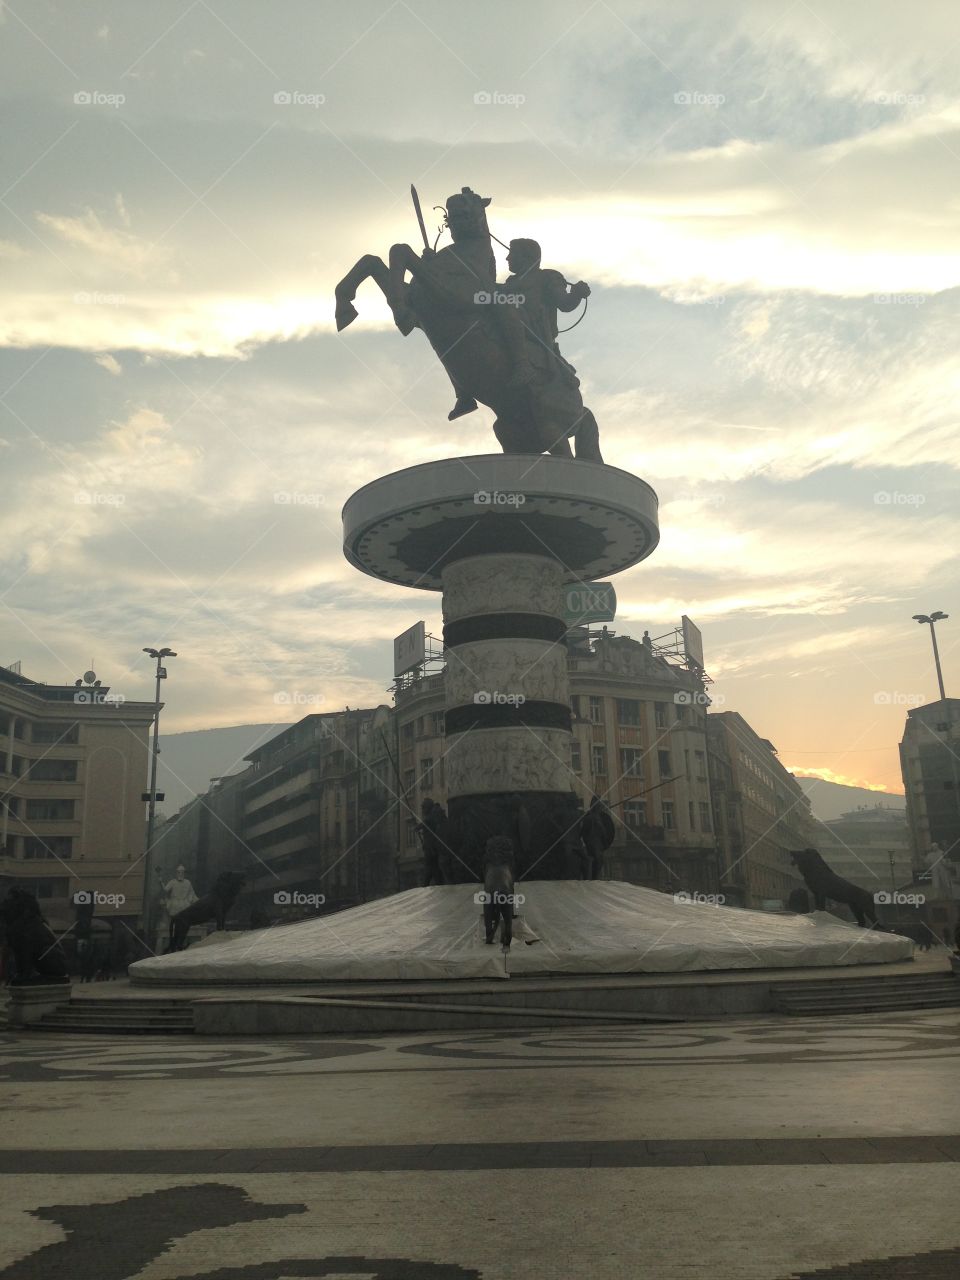 Monument "Warrior on a horse"
Alexander the Great!